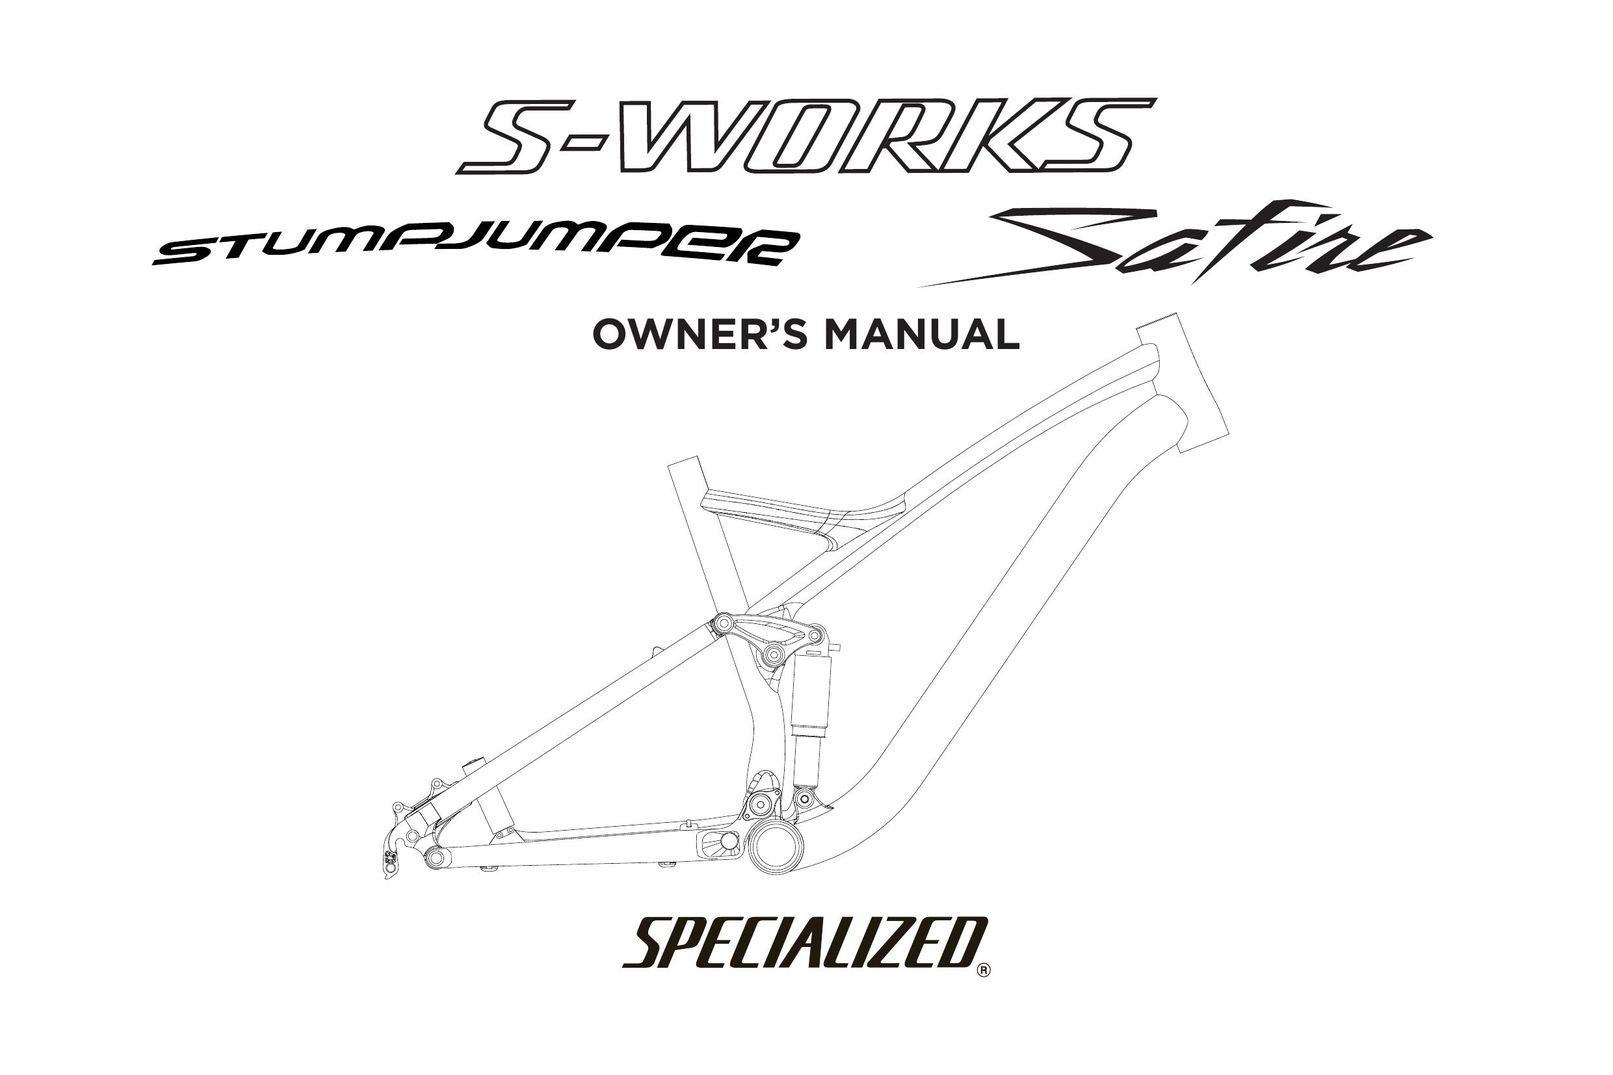 Specialized Safire Bicycle User Manual